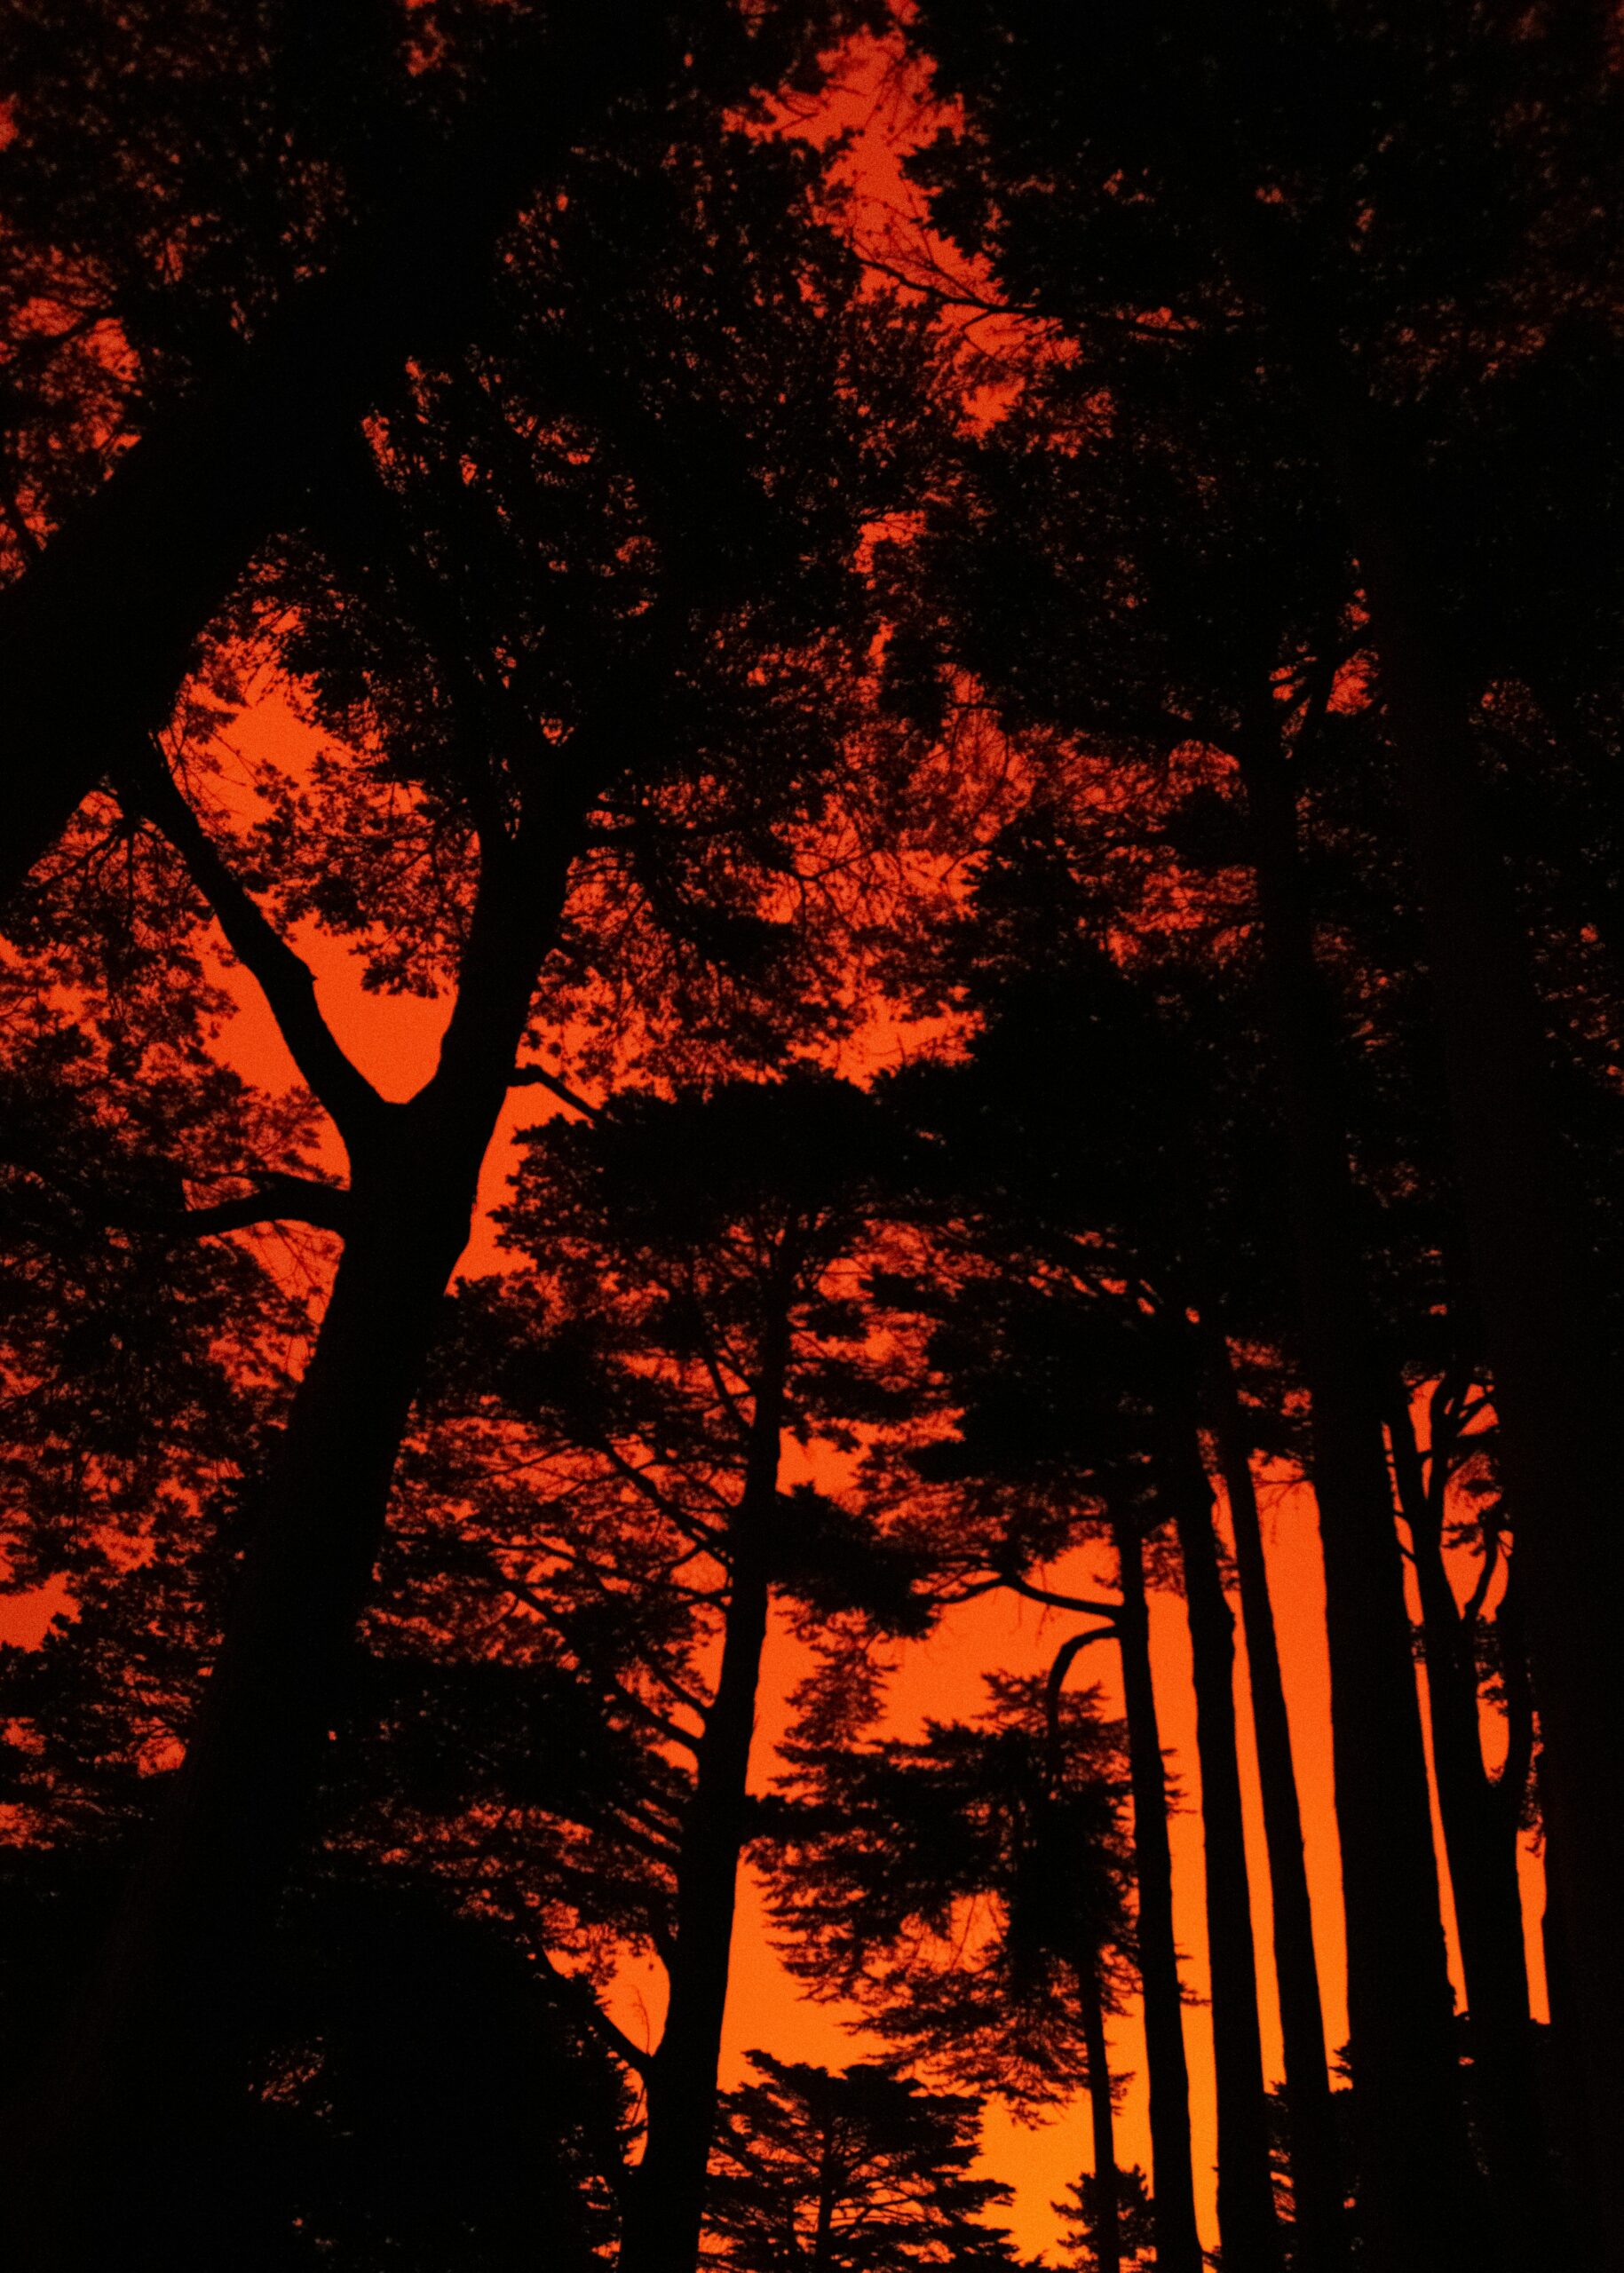 Trees are silhouetted against a red sky.